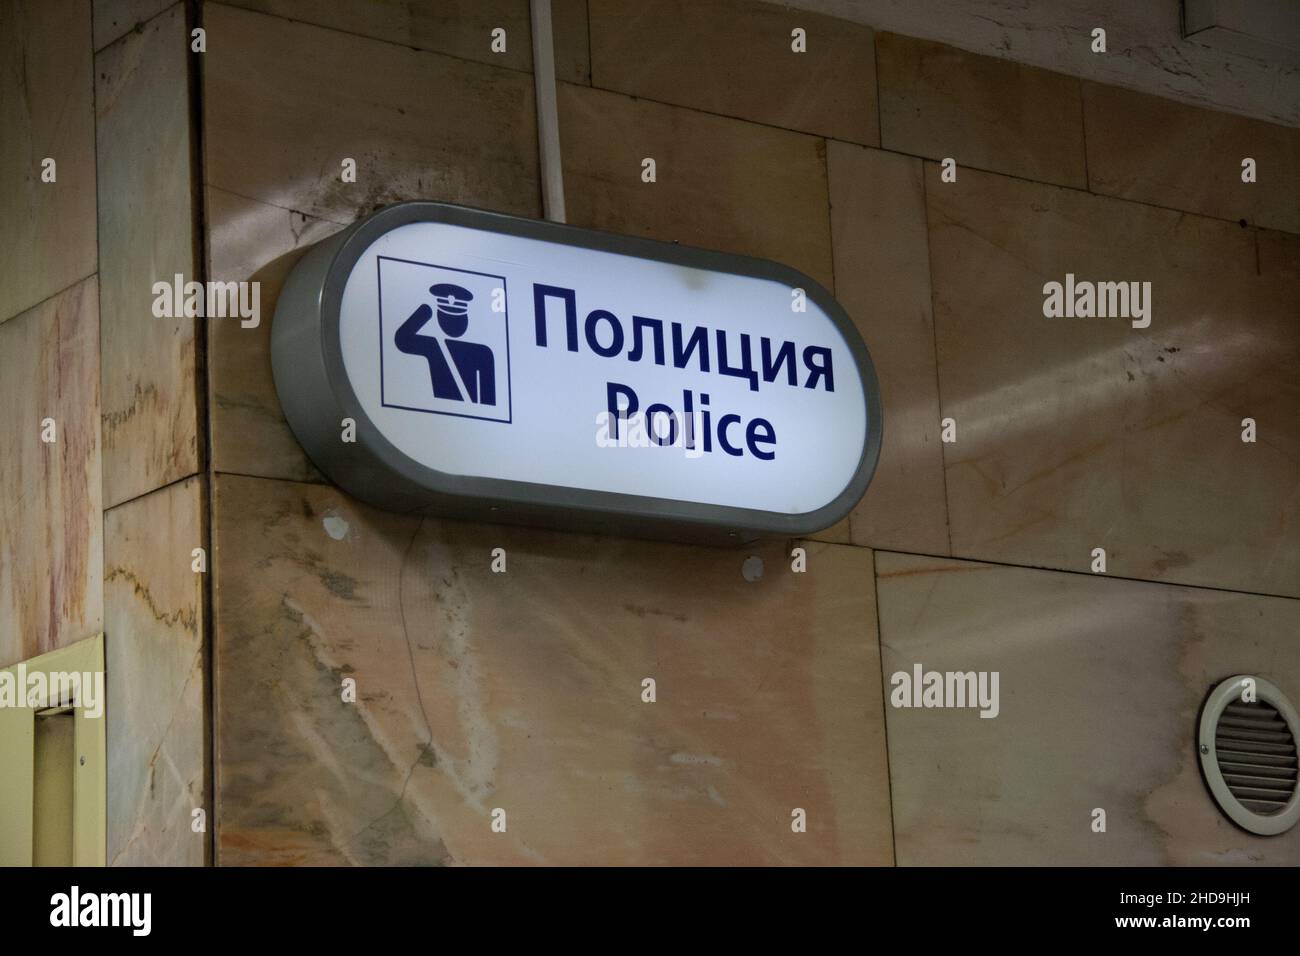 Sign for police office in Petersburg, Russia.  In English and Russian Cyrillic. Stock Photo